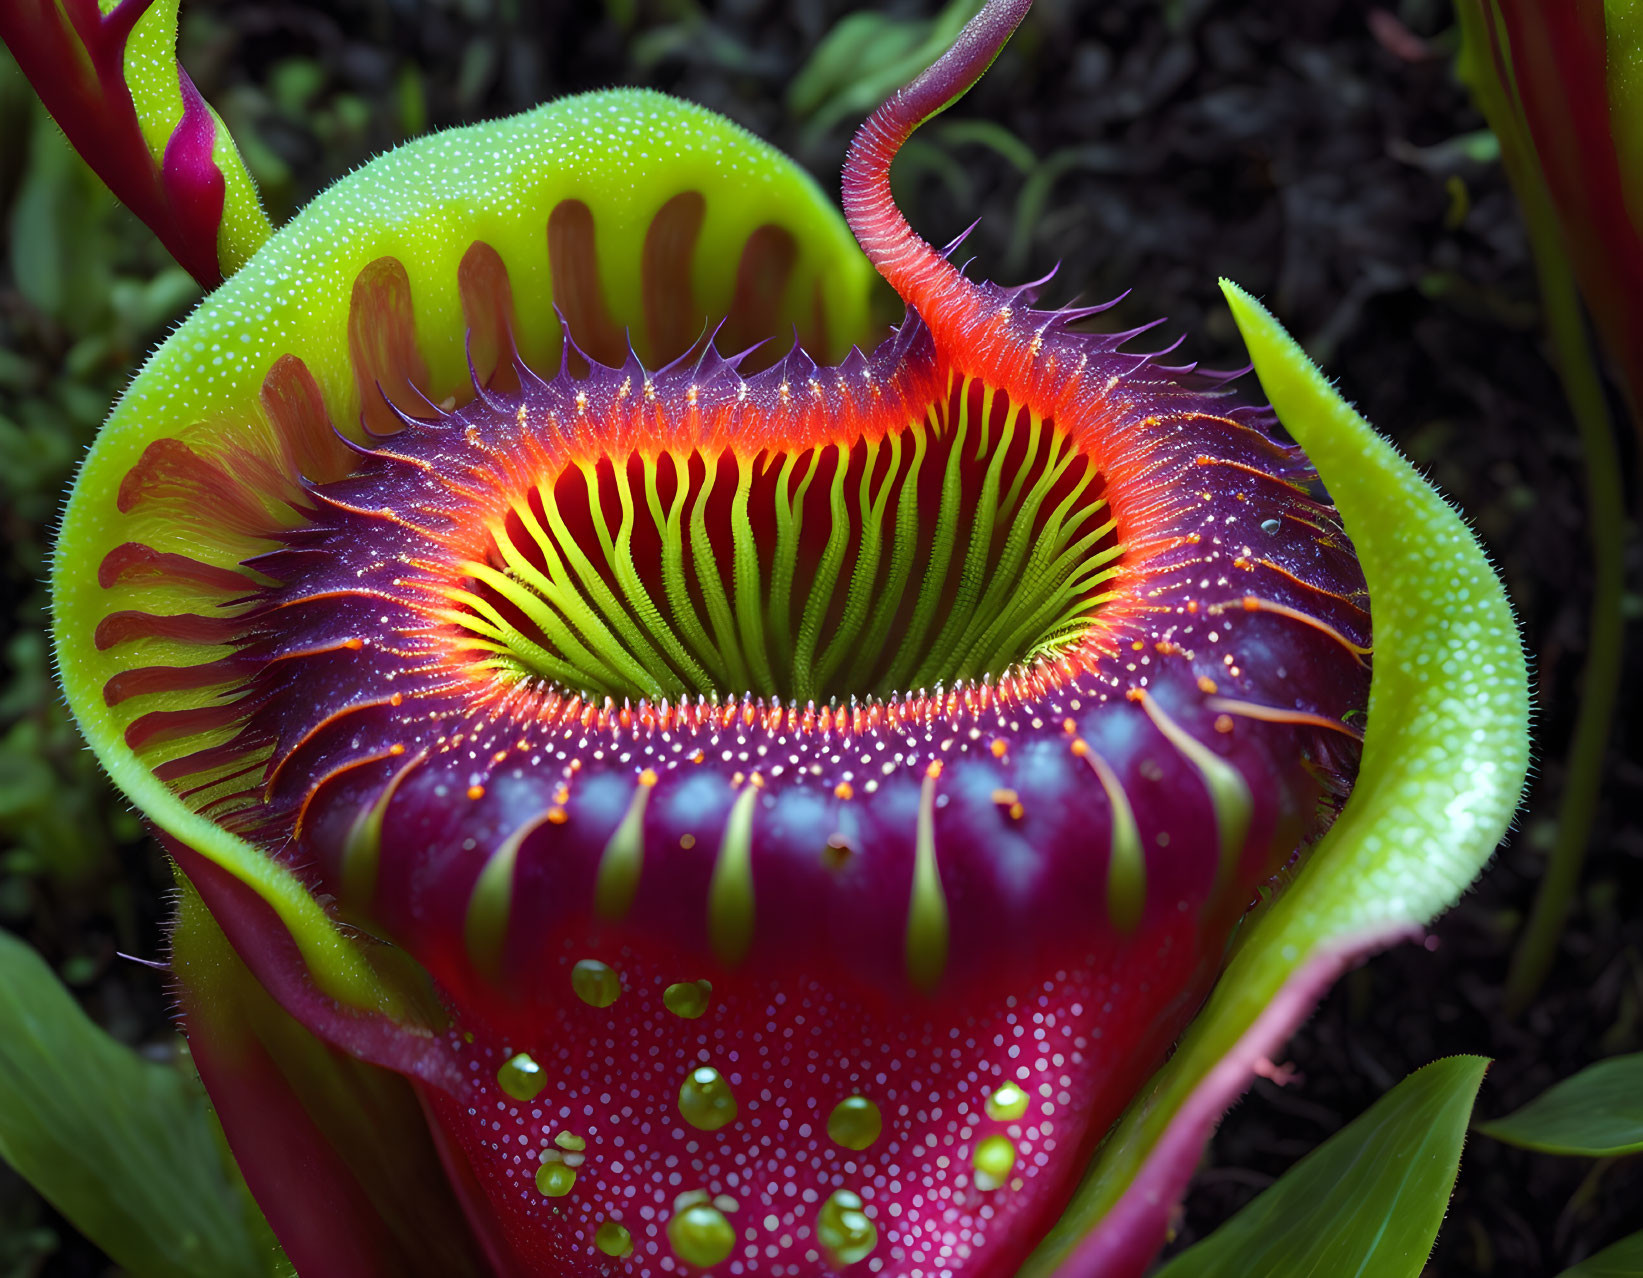 Colorful Carnivorous Plant with Red and Green Hues and Tooth-Like Edges